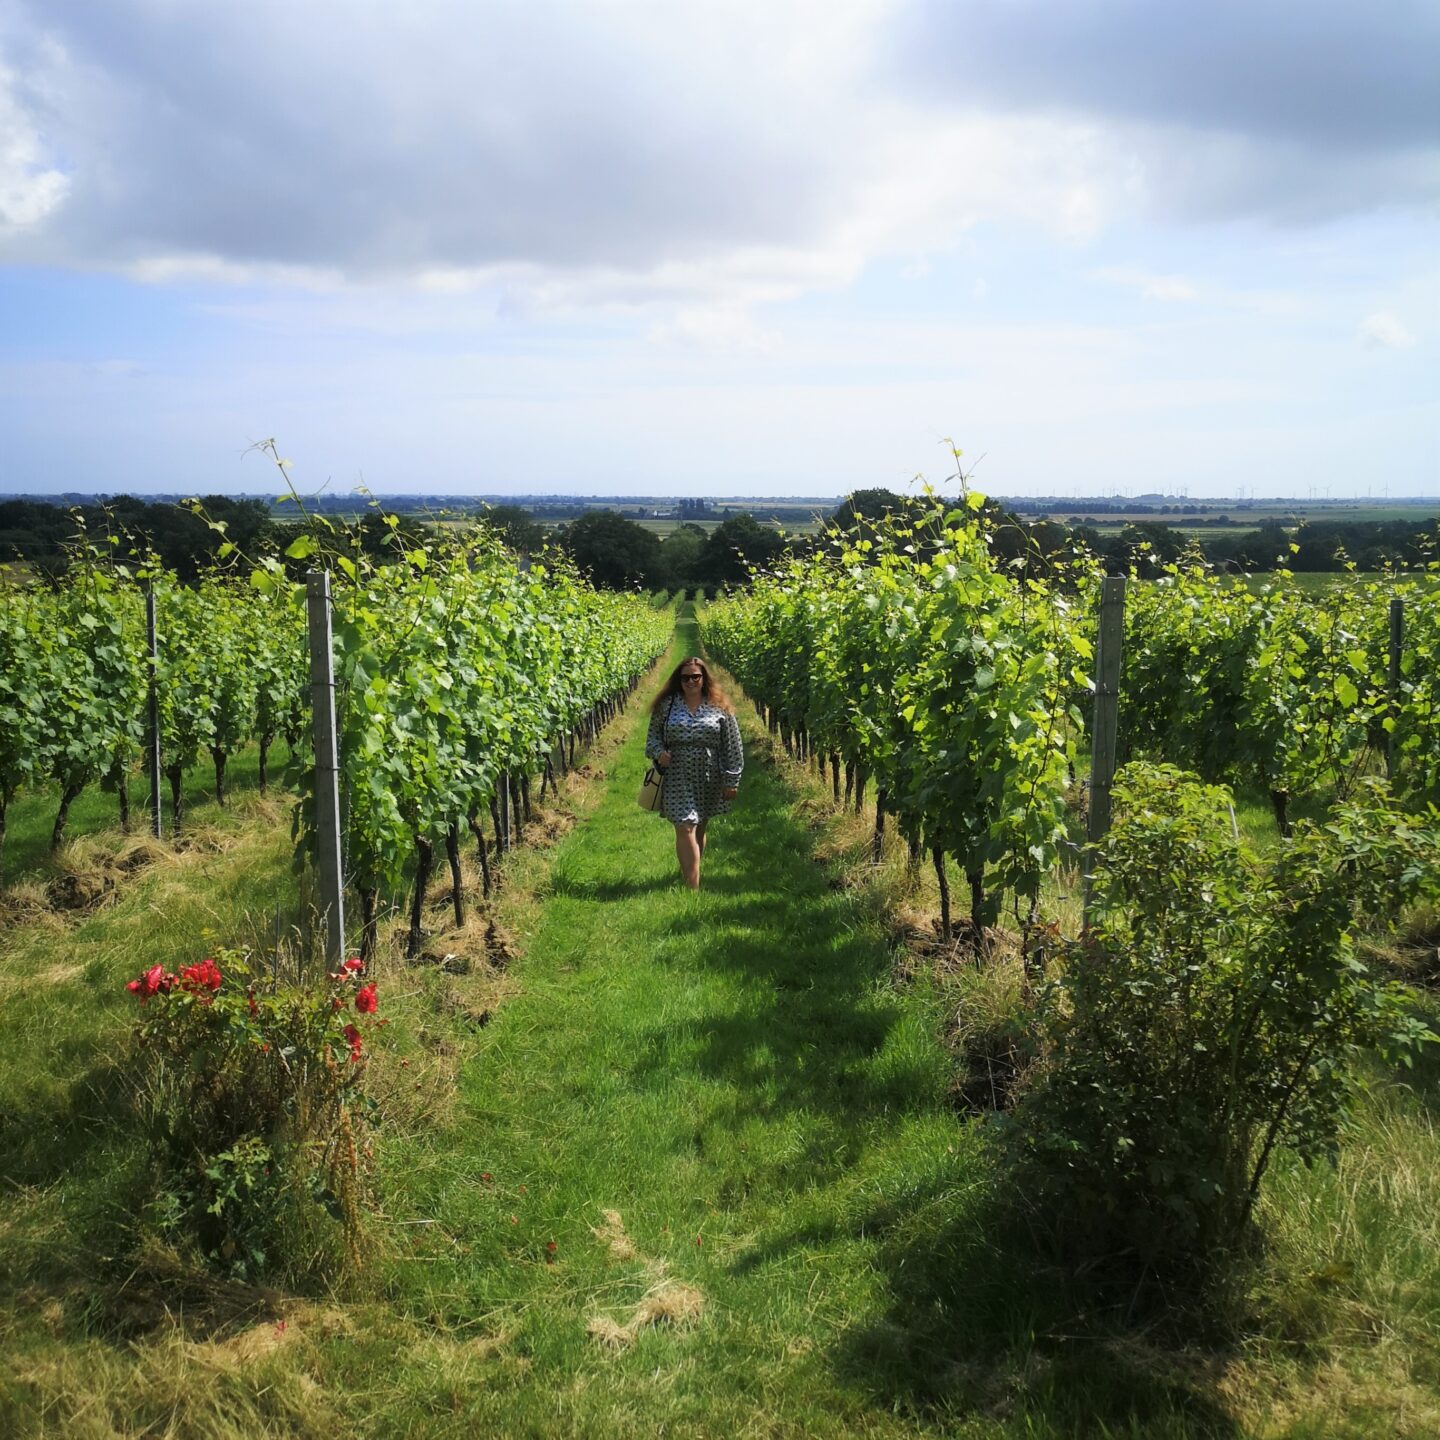 Picnic For Two With Gusbourne Wines, Gusbourne Vintage English Wines, English Sparkling Wines, Boutique English Winery, Things to do in Kent, Kent Life, Romantic Time, Appledore, Summer In Kent, Win, Giveaway, The Frenchie Mummy